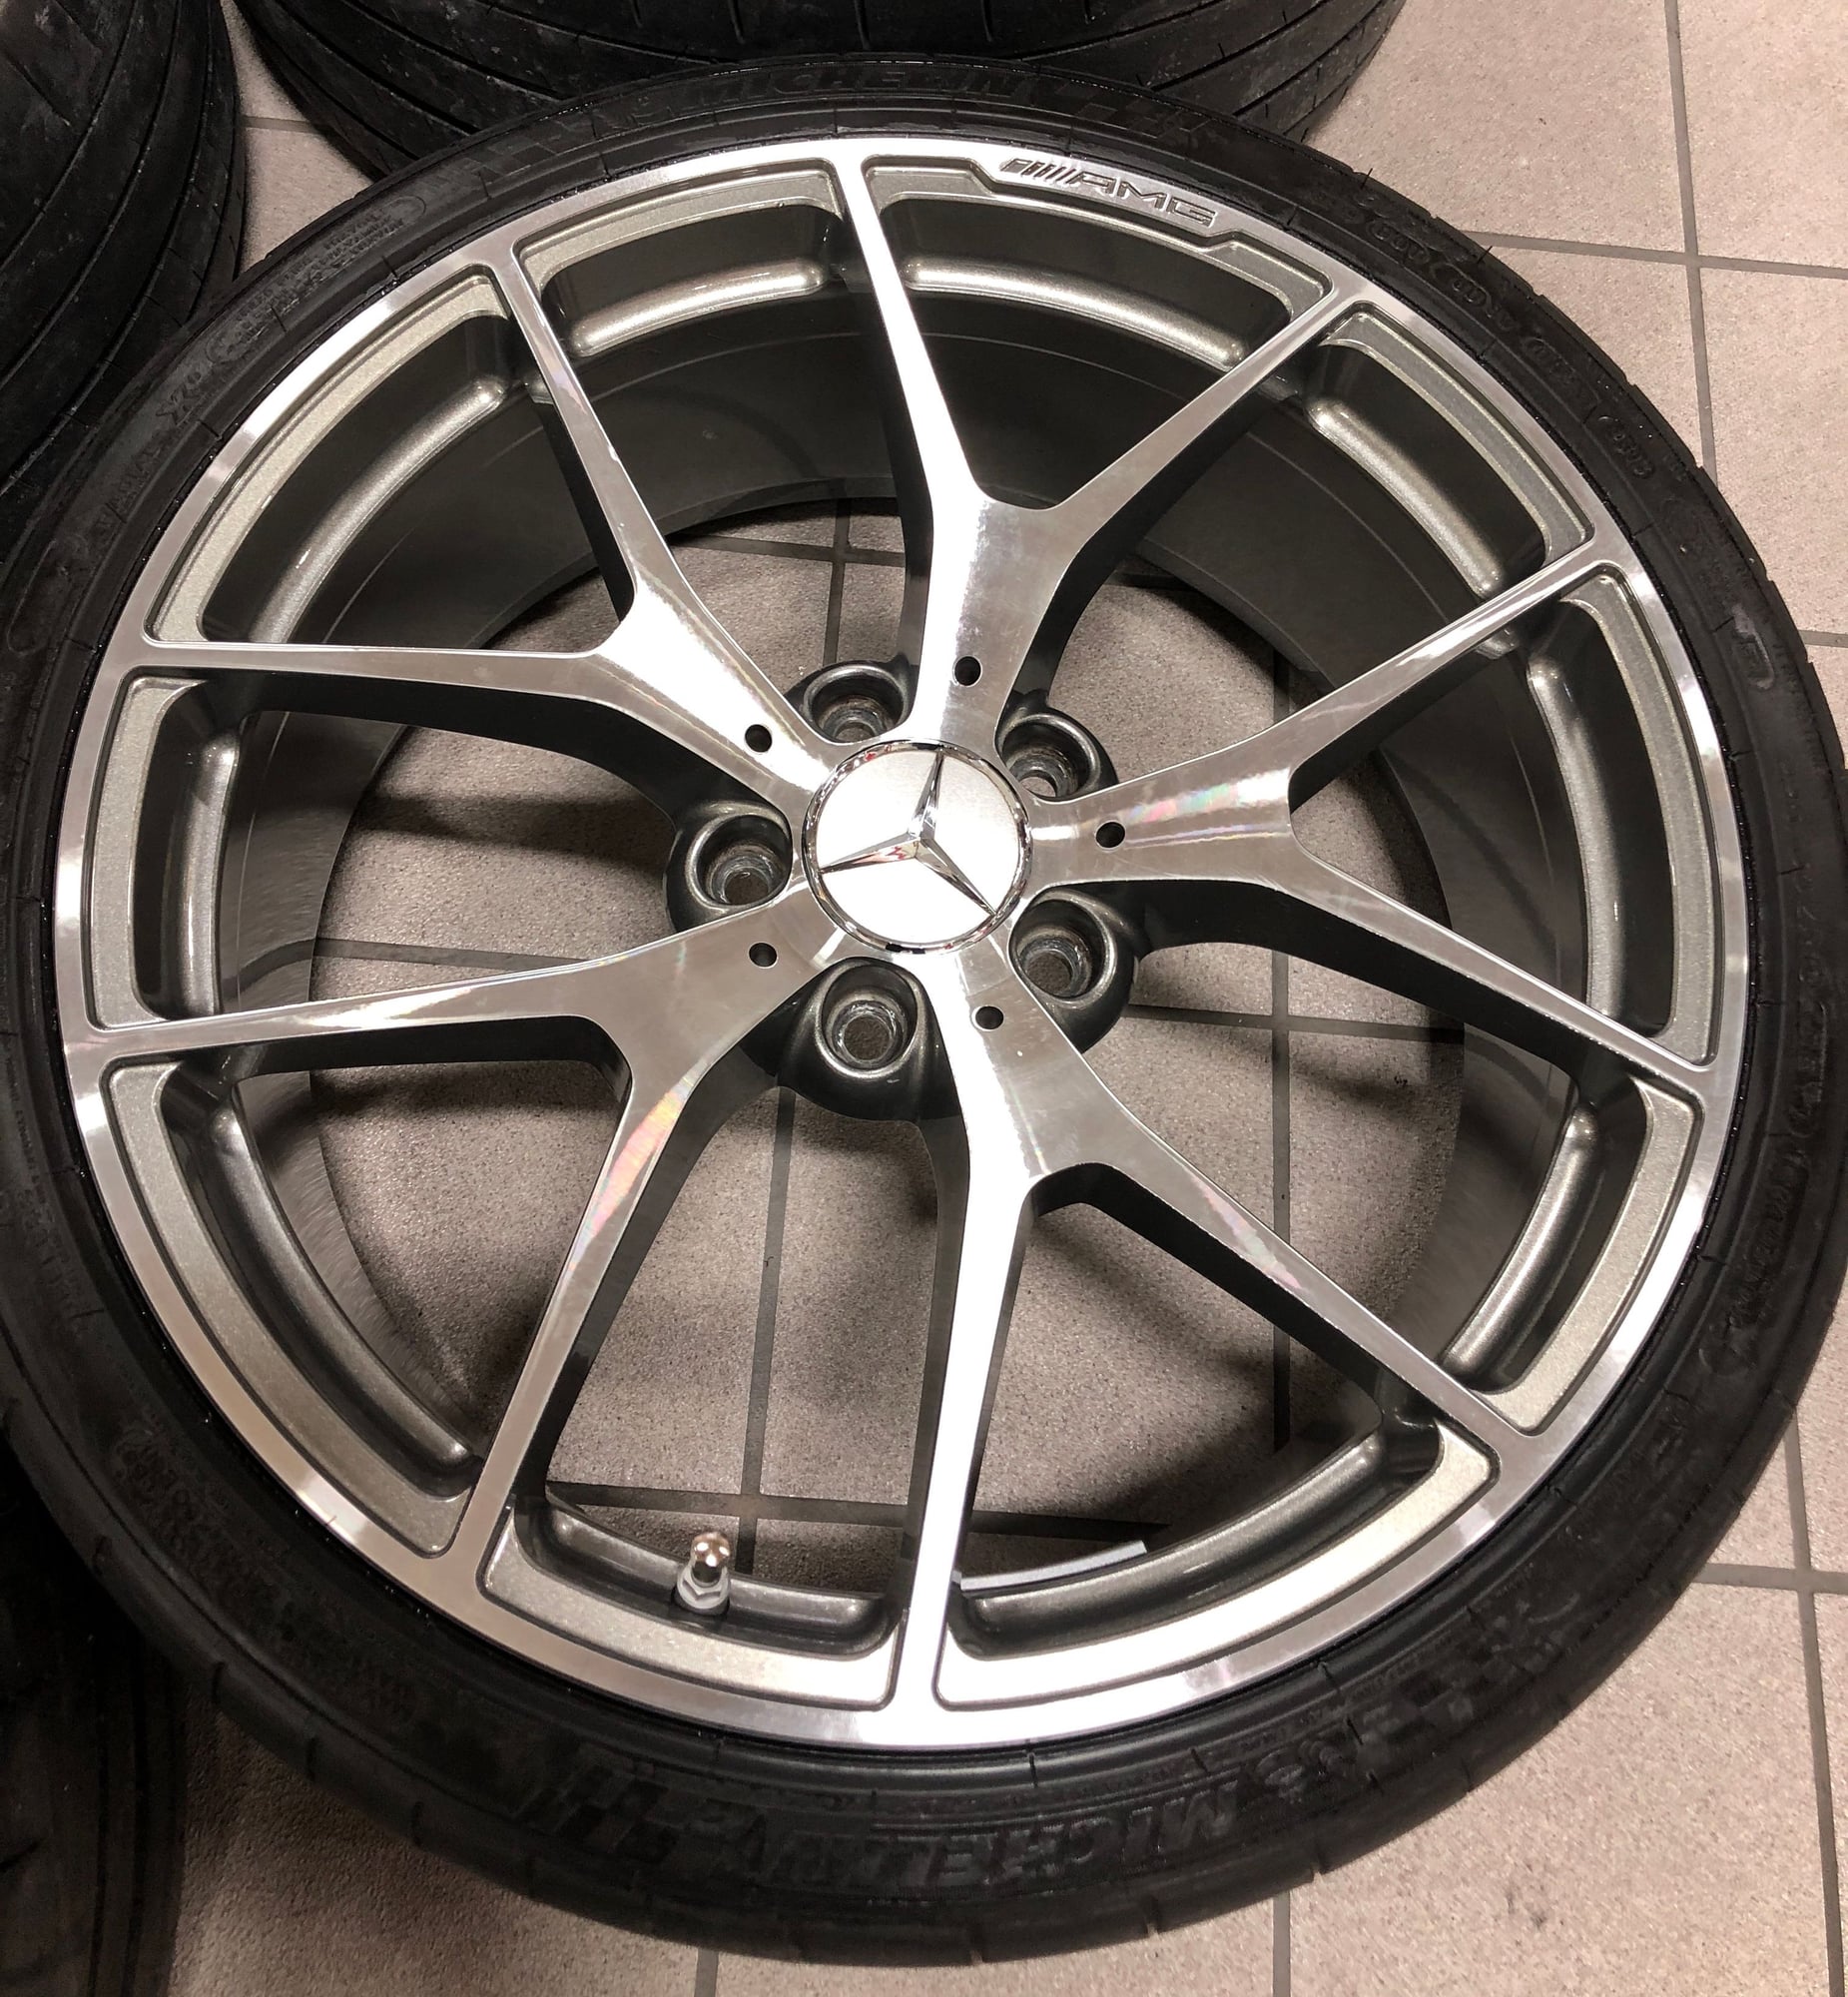 Wheels and Tires/Axles - Forged 507 C63 rims with Pilot Super Sports - Used - 2008 to 2018 Mercedes-Benz C63 AMG - Toronto, ON L3R4T1, Canada